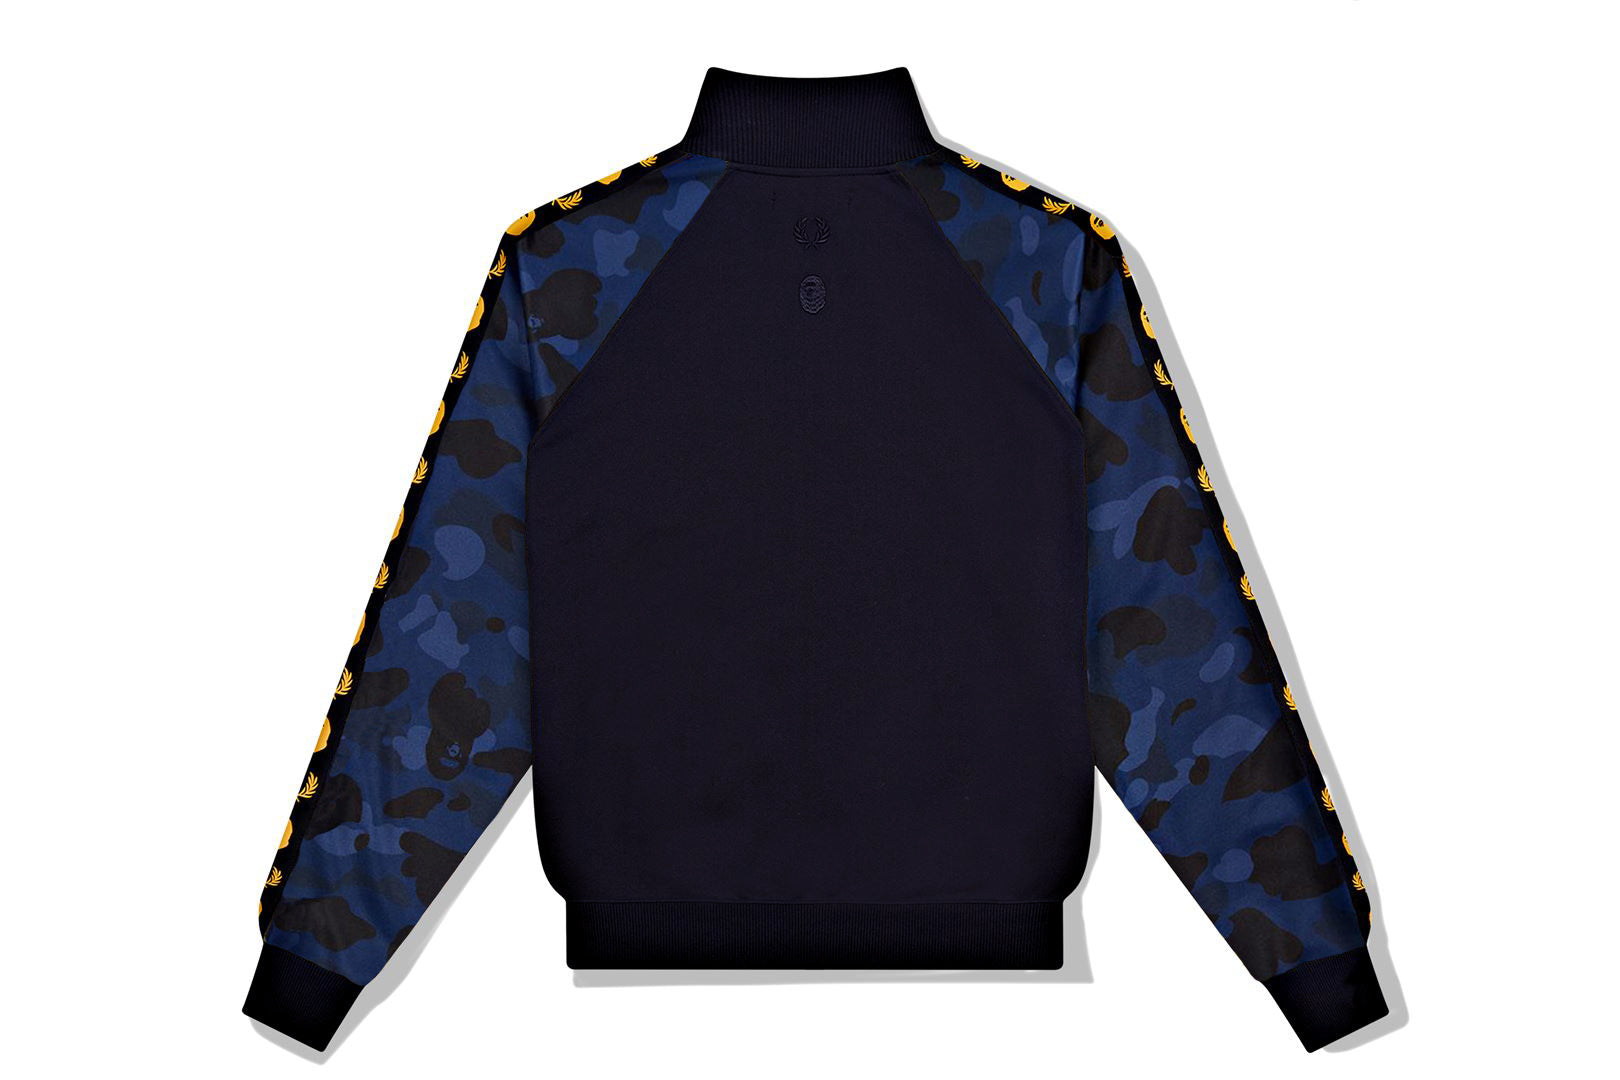 【A・BATHING APE】high necked track suit